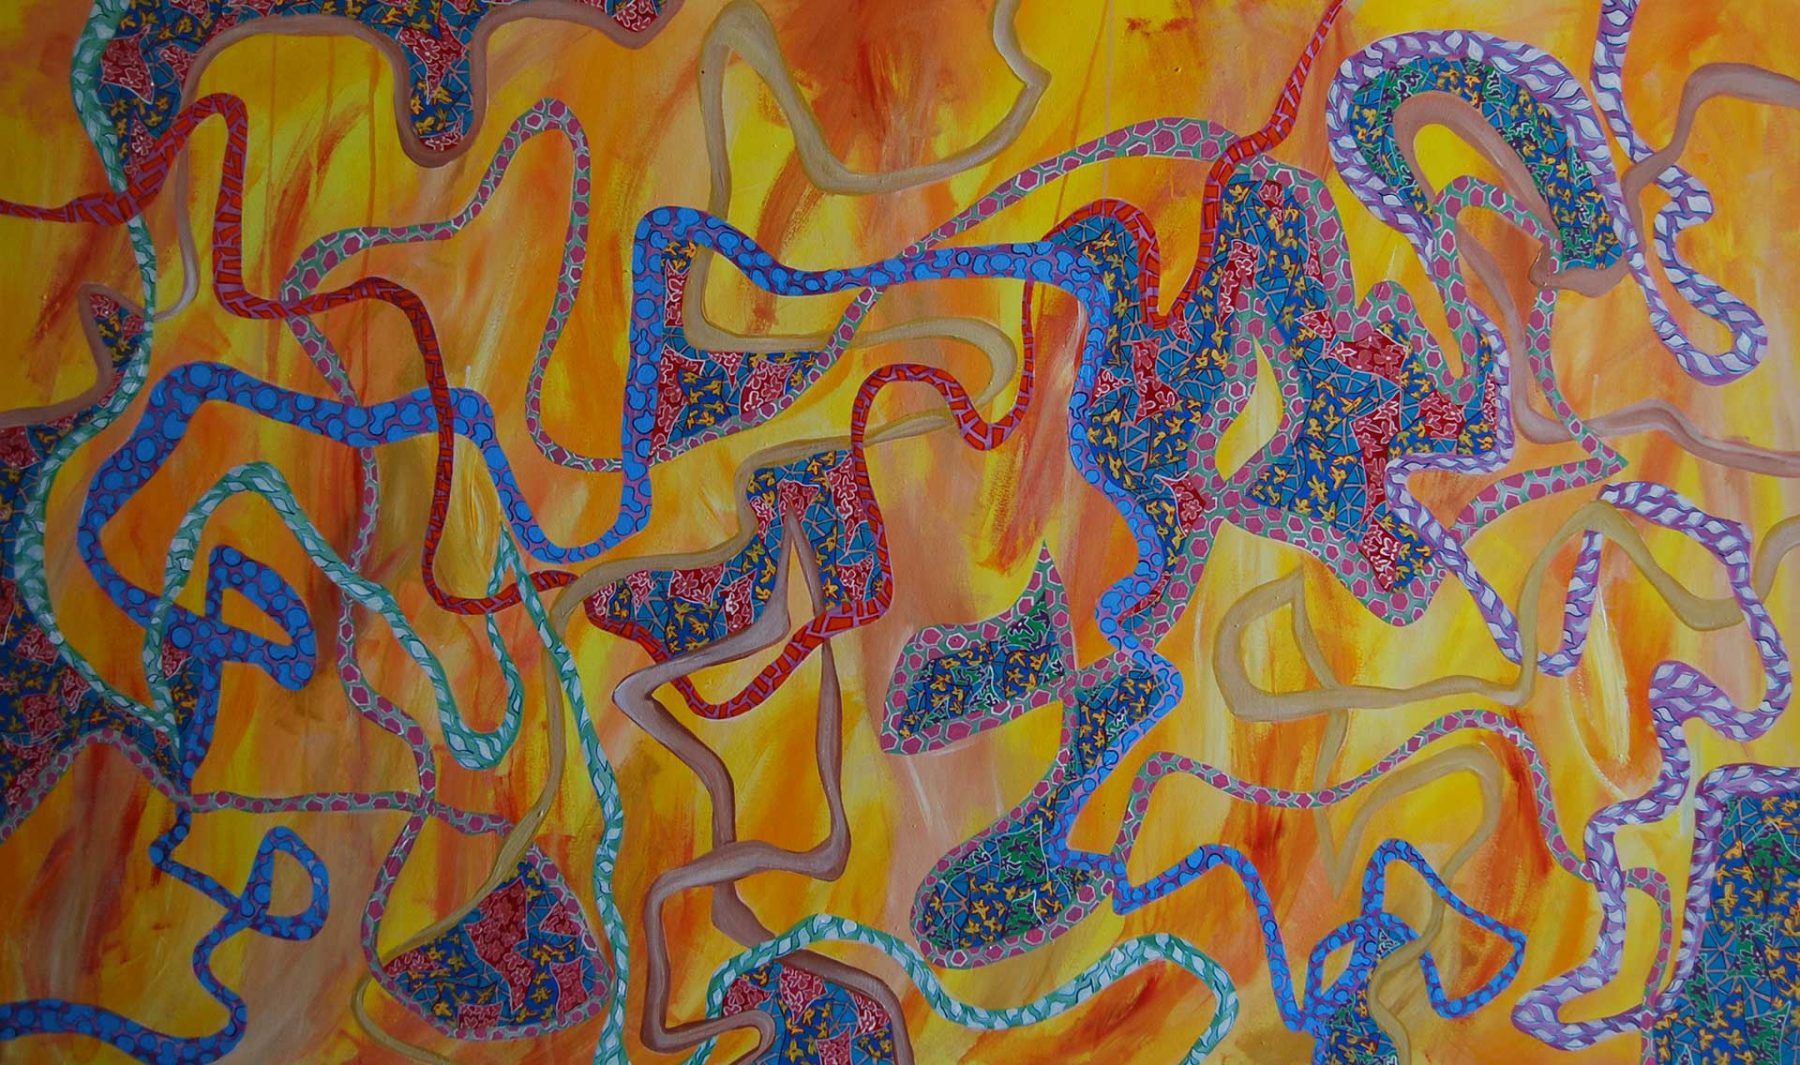 Summer Zohar Landscape (2008) acrylic on canvas, 0.91H x 1.52W meters